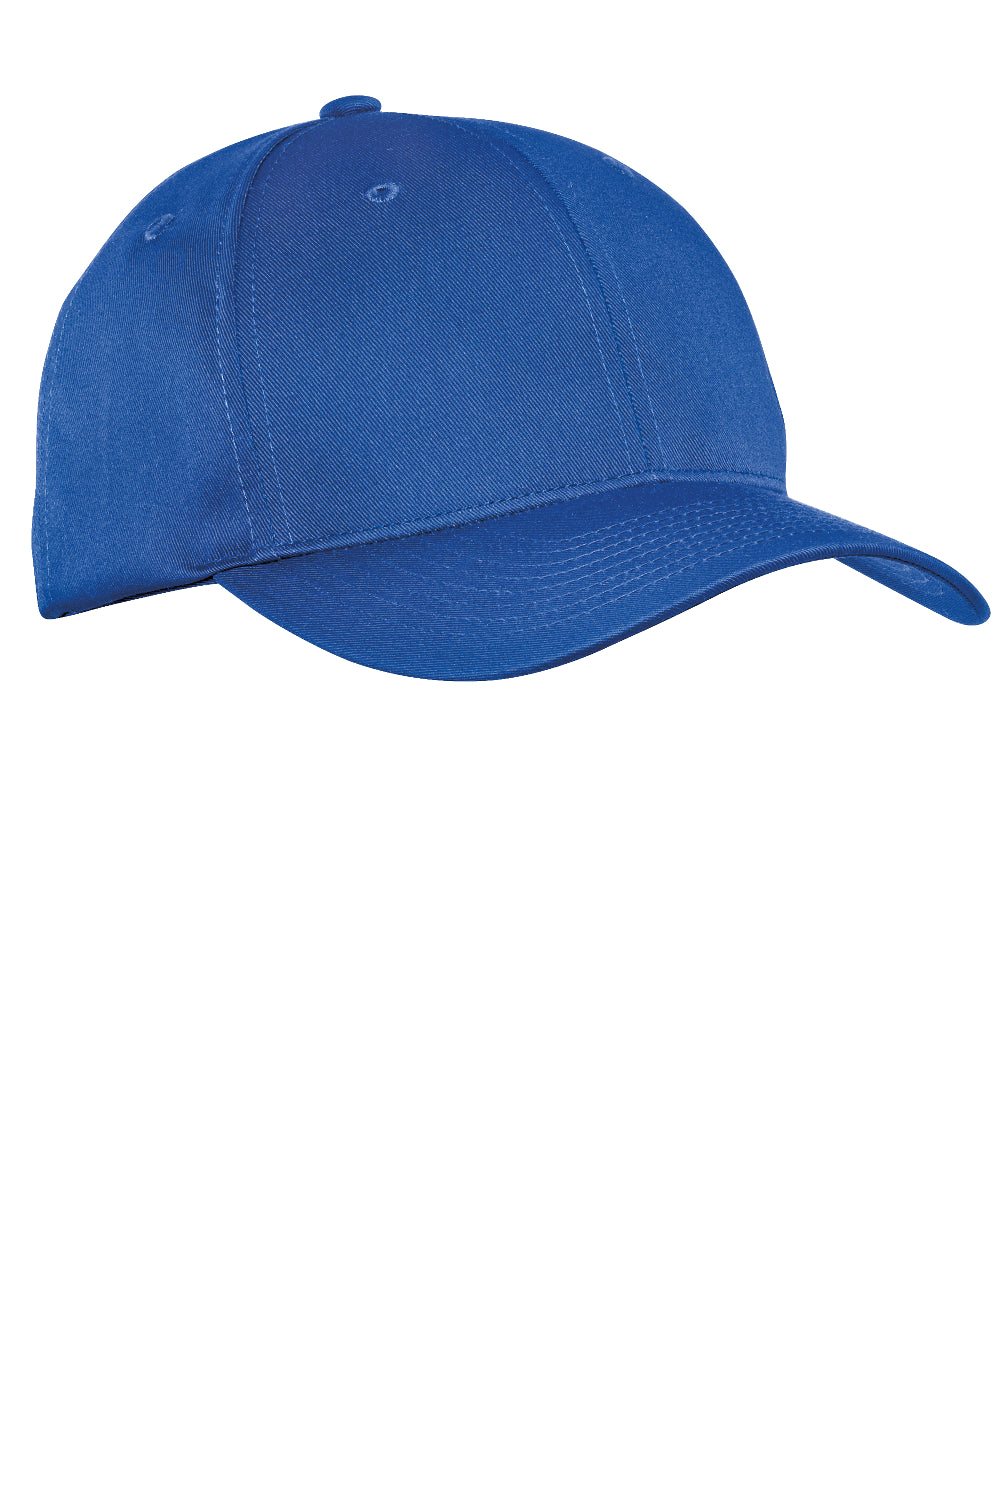 Port Authority C800 Fine Twill Hat Royal Blue Front